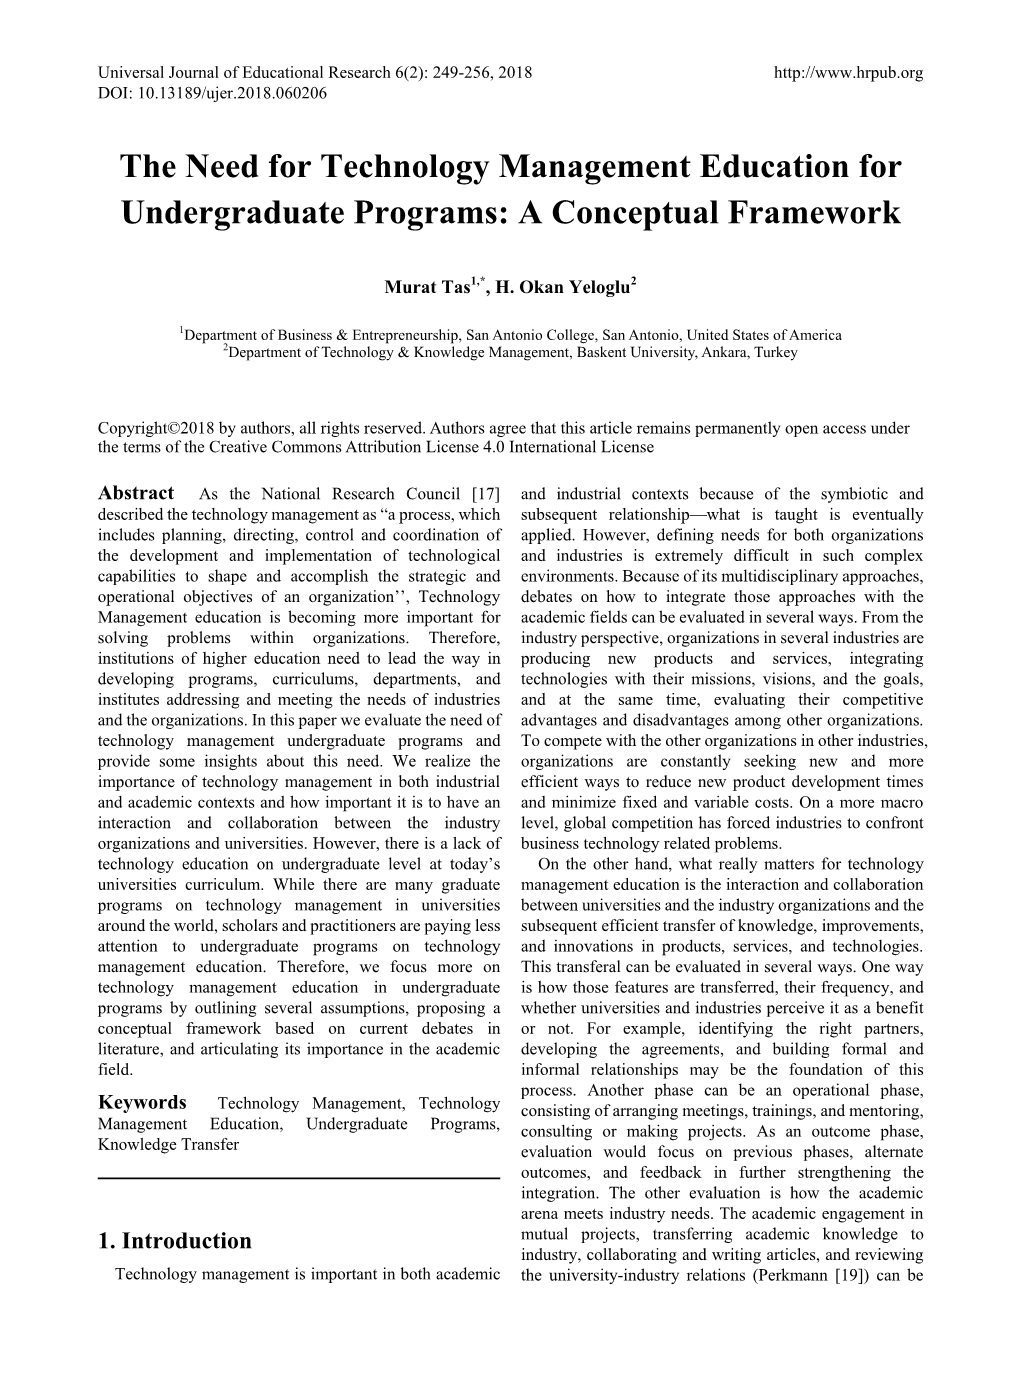 The Need for Technology Management Education for Undergraduate Programs: a Conceptual Framework